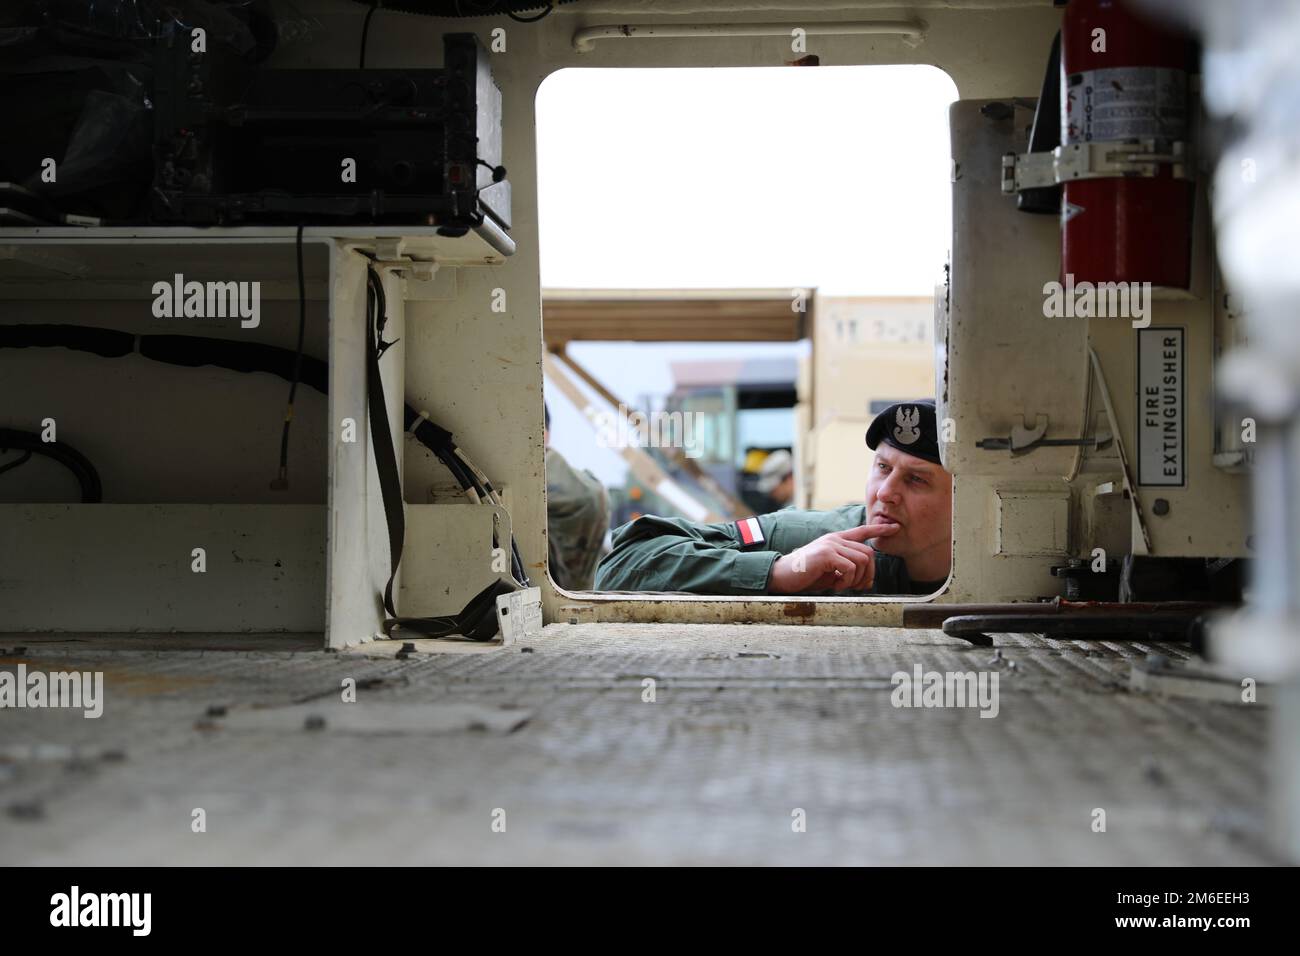 A Polish soldier looks inside an M88 Hercules Recovery Vehicle during a class on sustainment taught by senior noncommissioned officers assigned to 2nd Battalion, 34th Armored Regiment, 1st Armored Brigade Combat Team, 1st Infantry Division, as a part of the Abrams Operations Summit at Drawsko Pomorskie, Poland, April 26, 2022. Working alongside Allies in the European theater remains an integral part of demonstrating alliance readiness, interoperability, and capability. Stock Photo